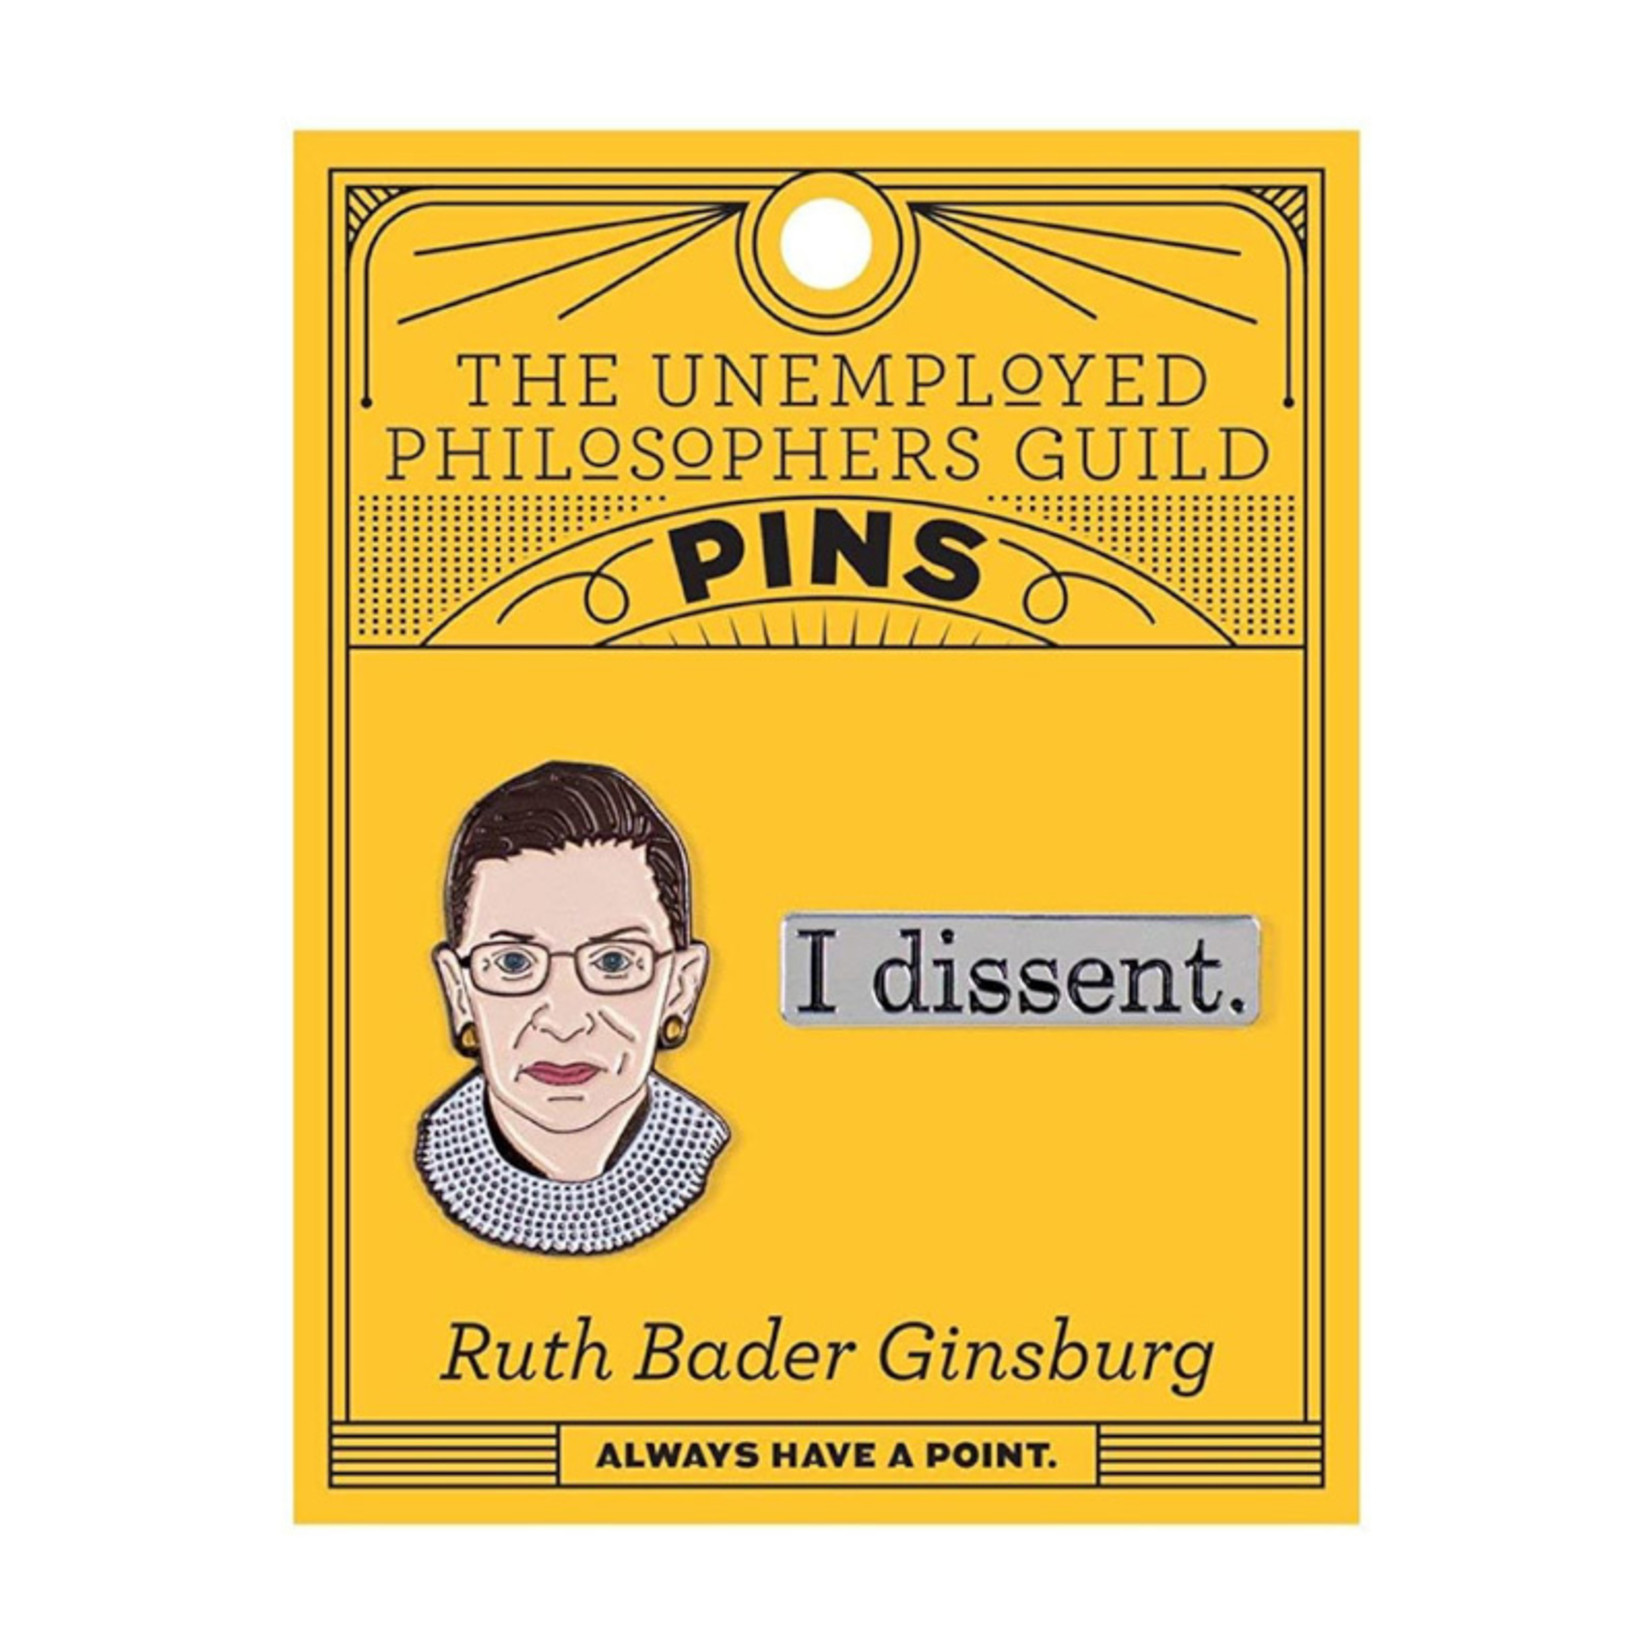 The Unemployed Philosophers Guild RBG Pin